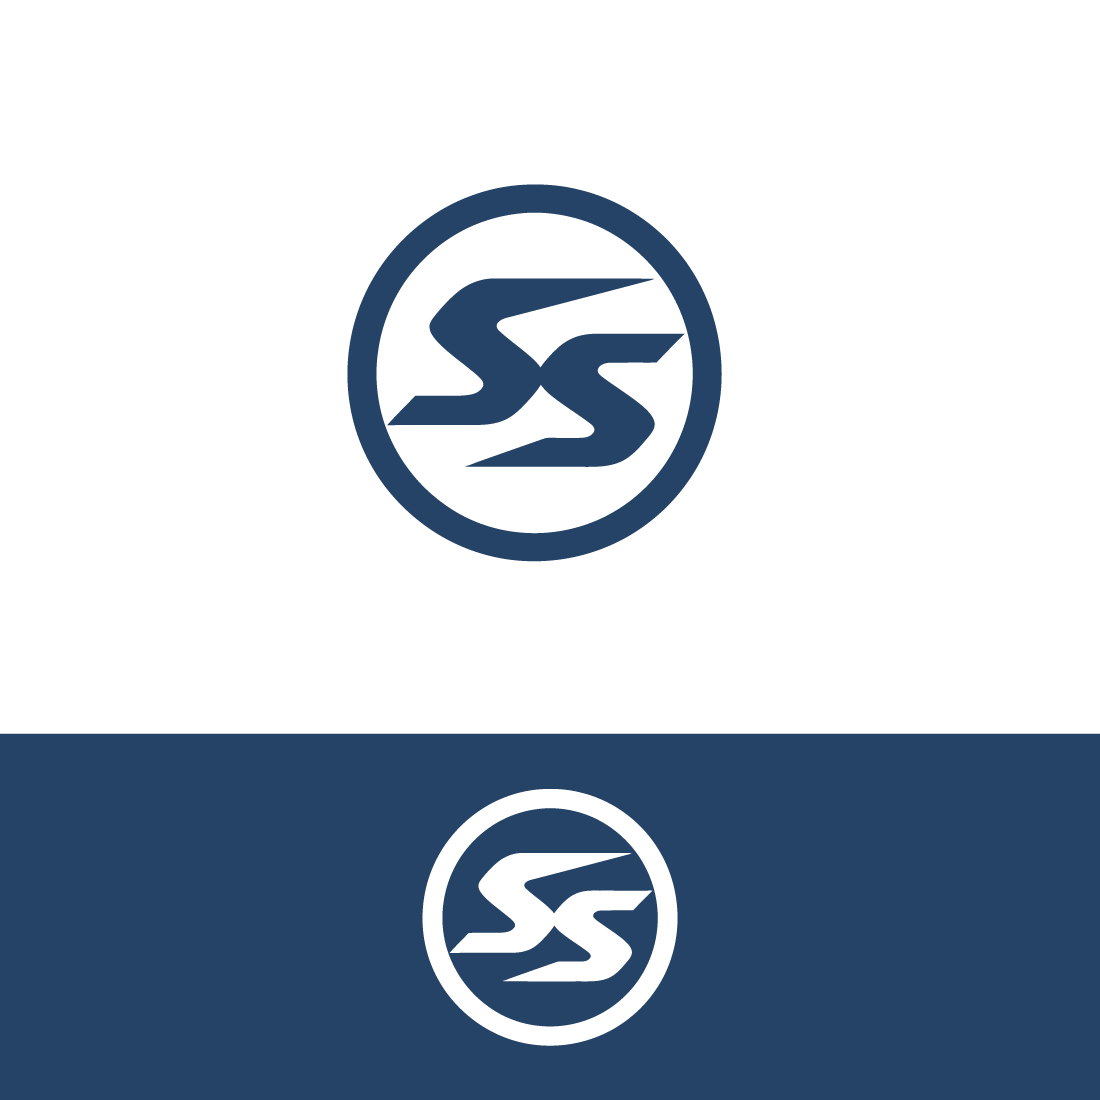 letters SS logo design preview image.